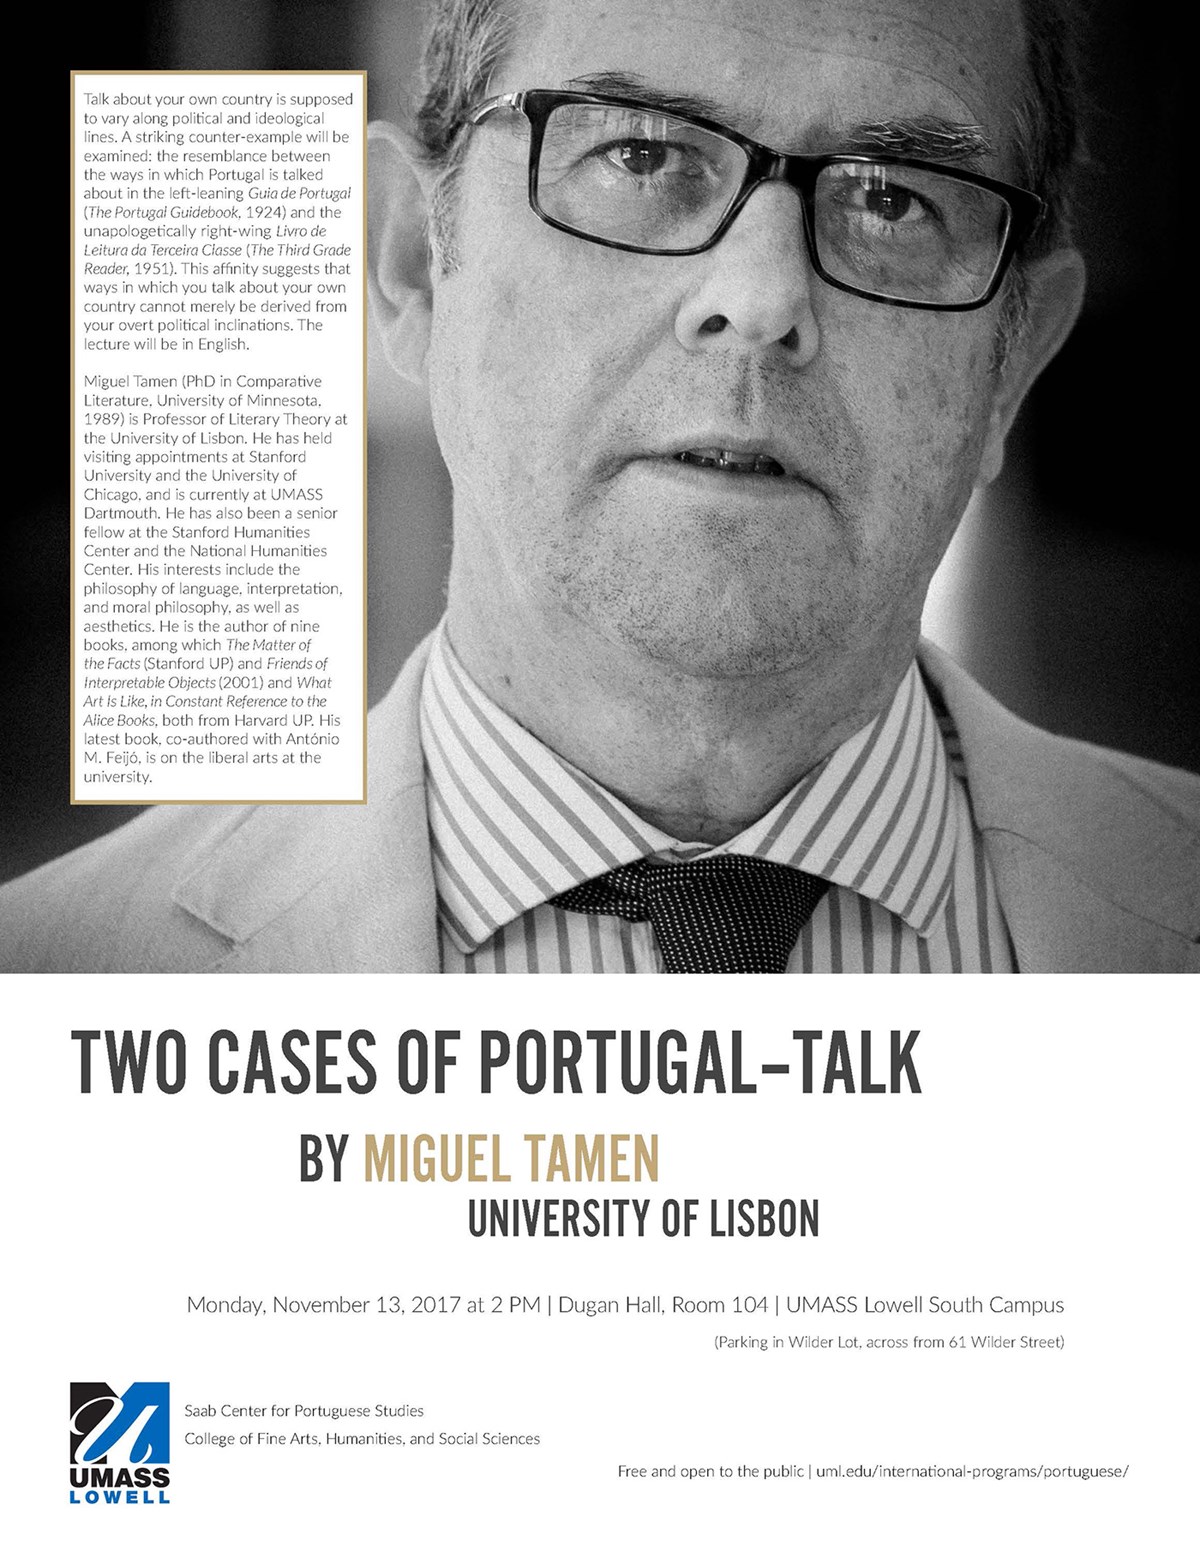 Flyer for Miguel Tamen: 2 Cases of Portugal-Talk When: Monday, November 13, 2017 at 2 p.m.  Where: Dugan Hall, Room 104, UMass Lowell South Campus 